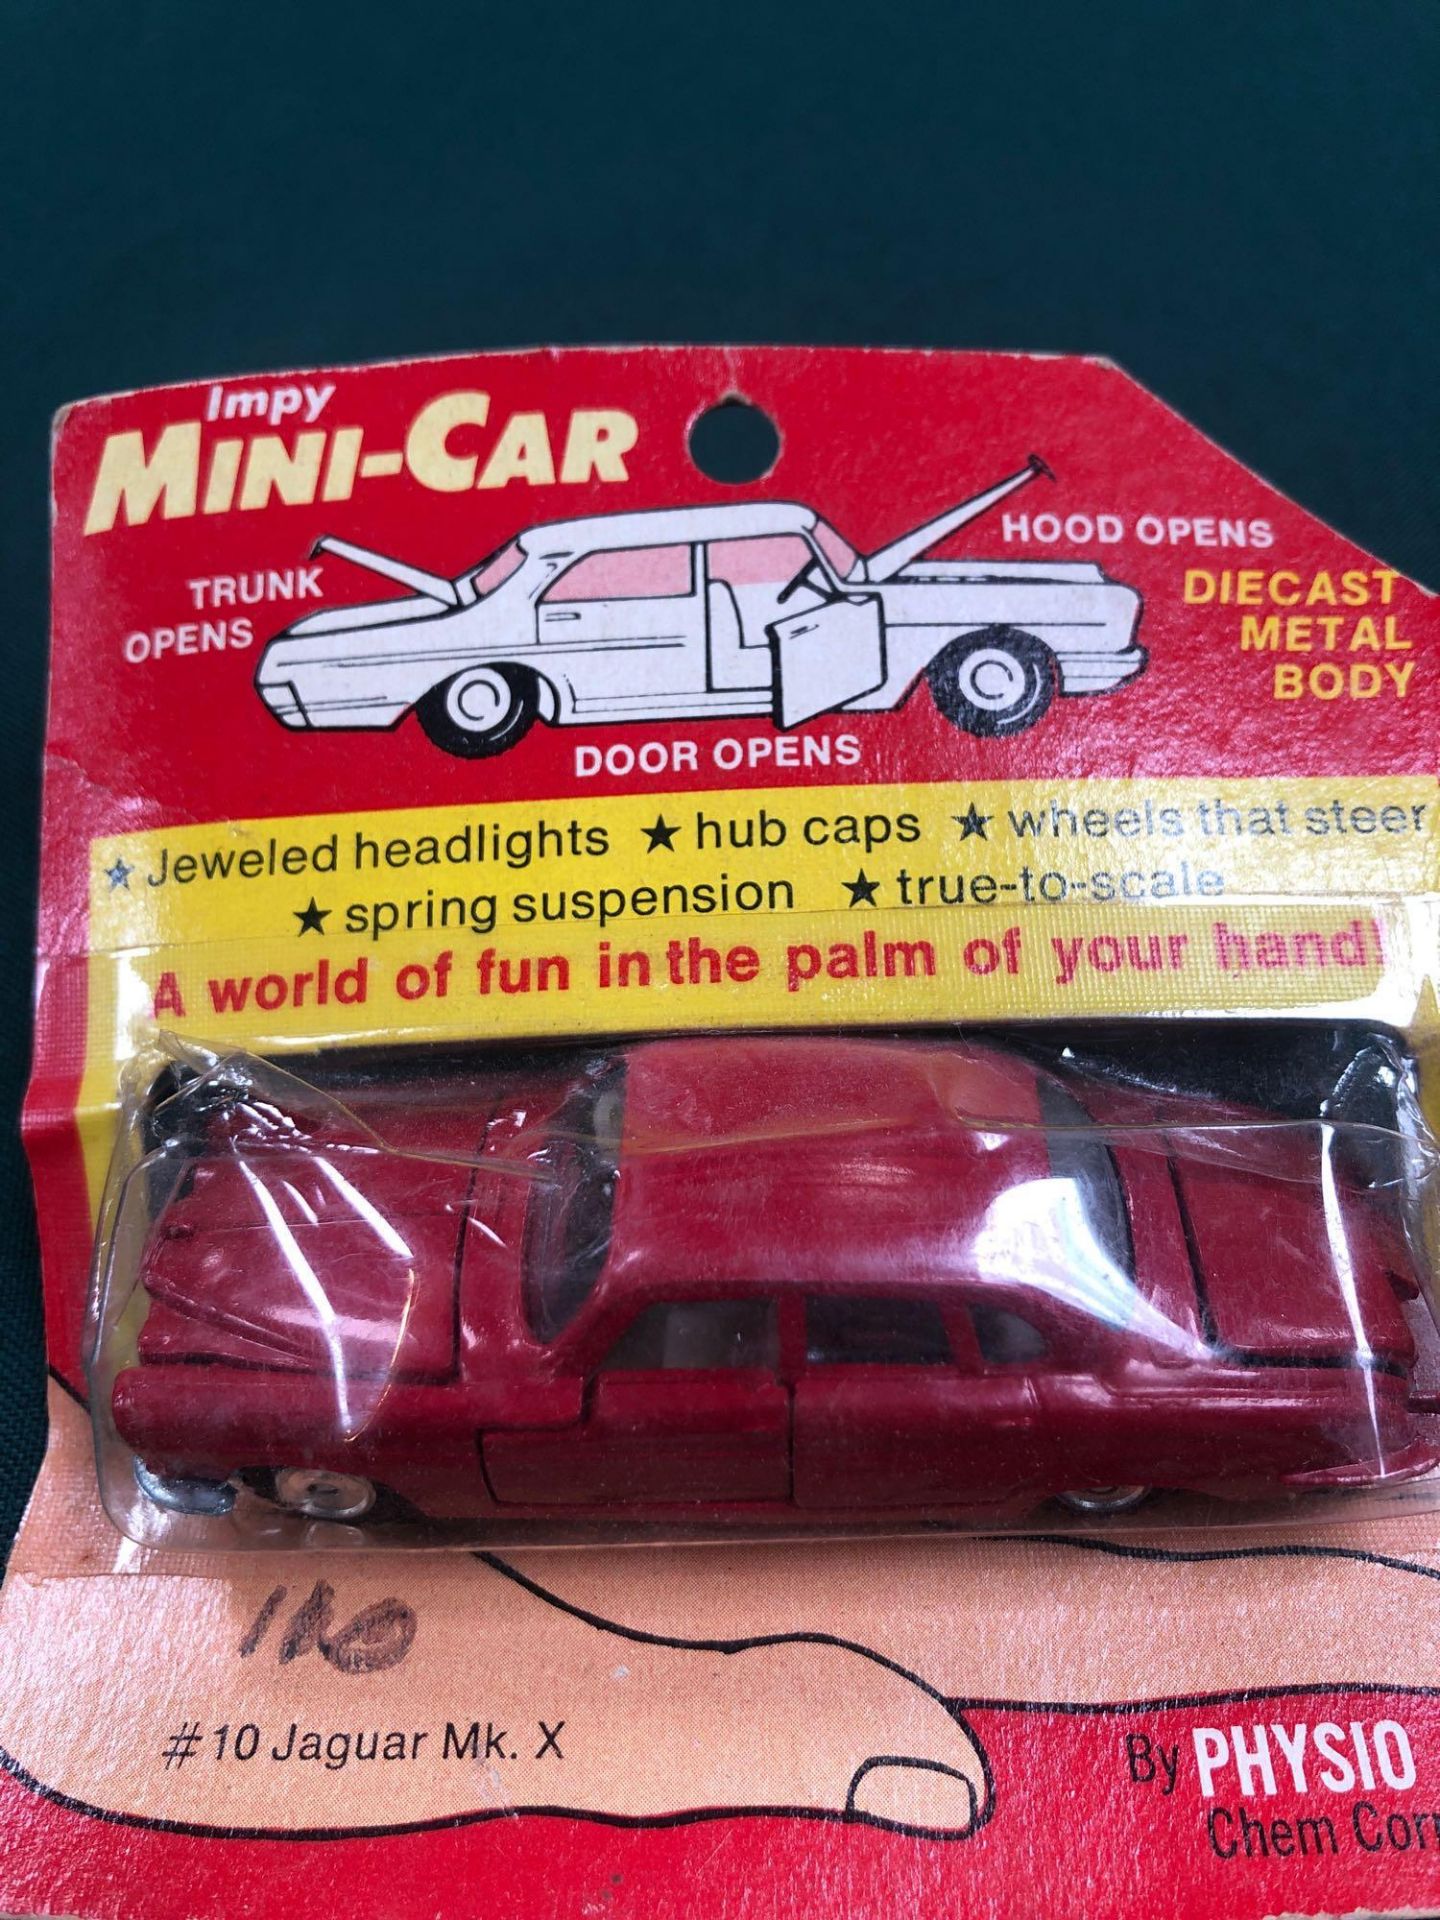 Lone Star MP Minicar Diecast #10 Jaguar Mark X In Red On Bubble Card - Image 2 of 2